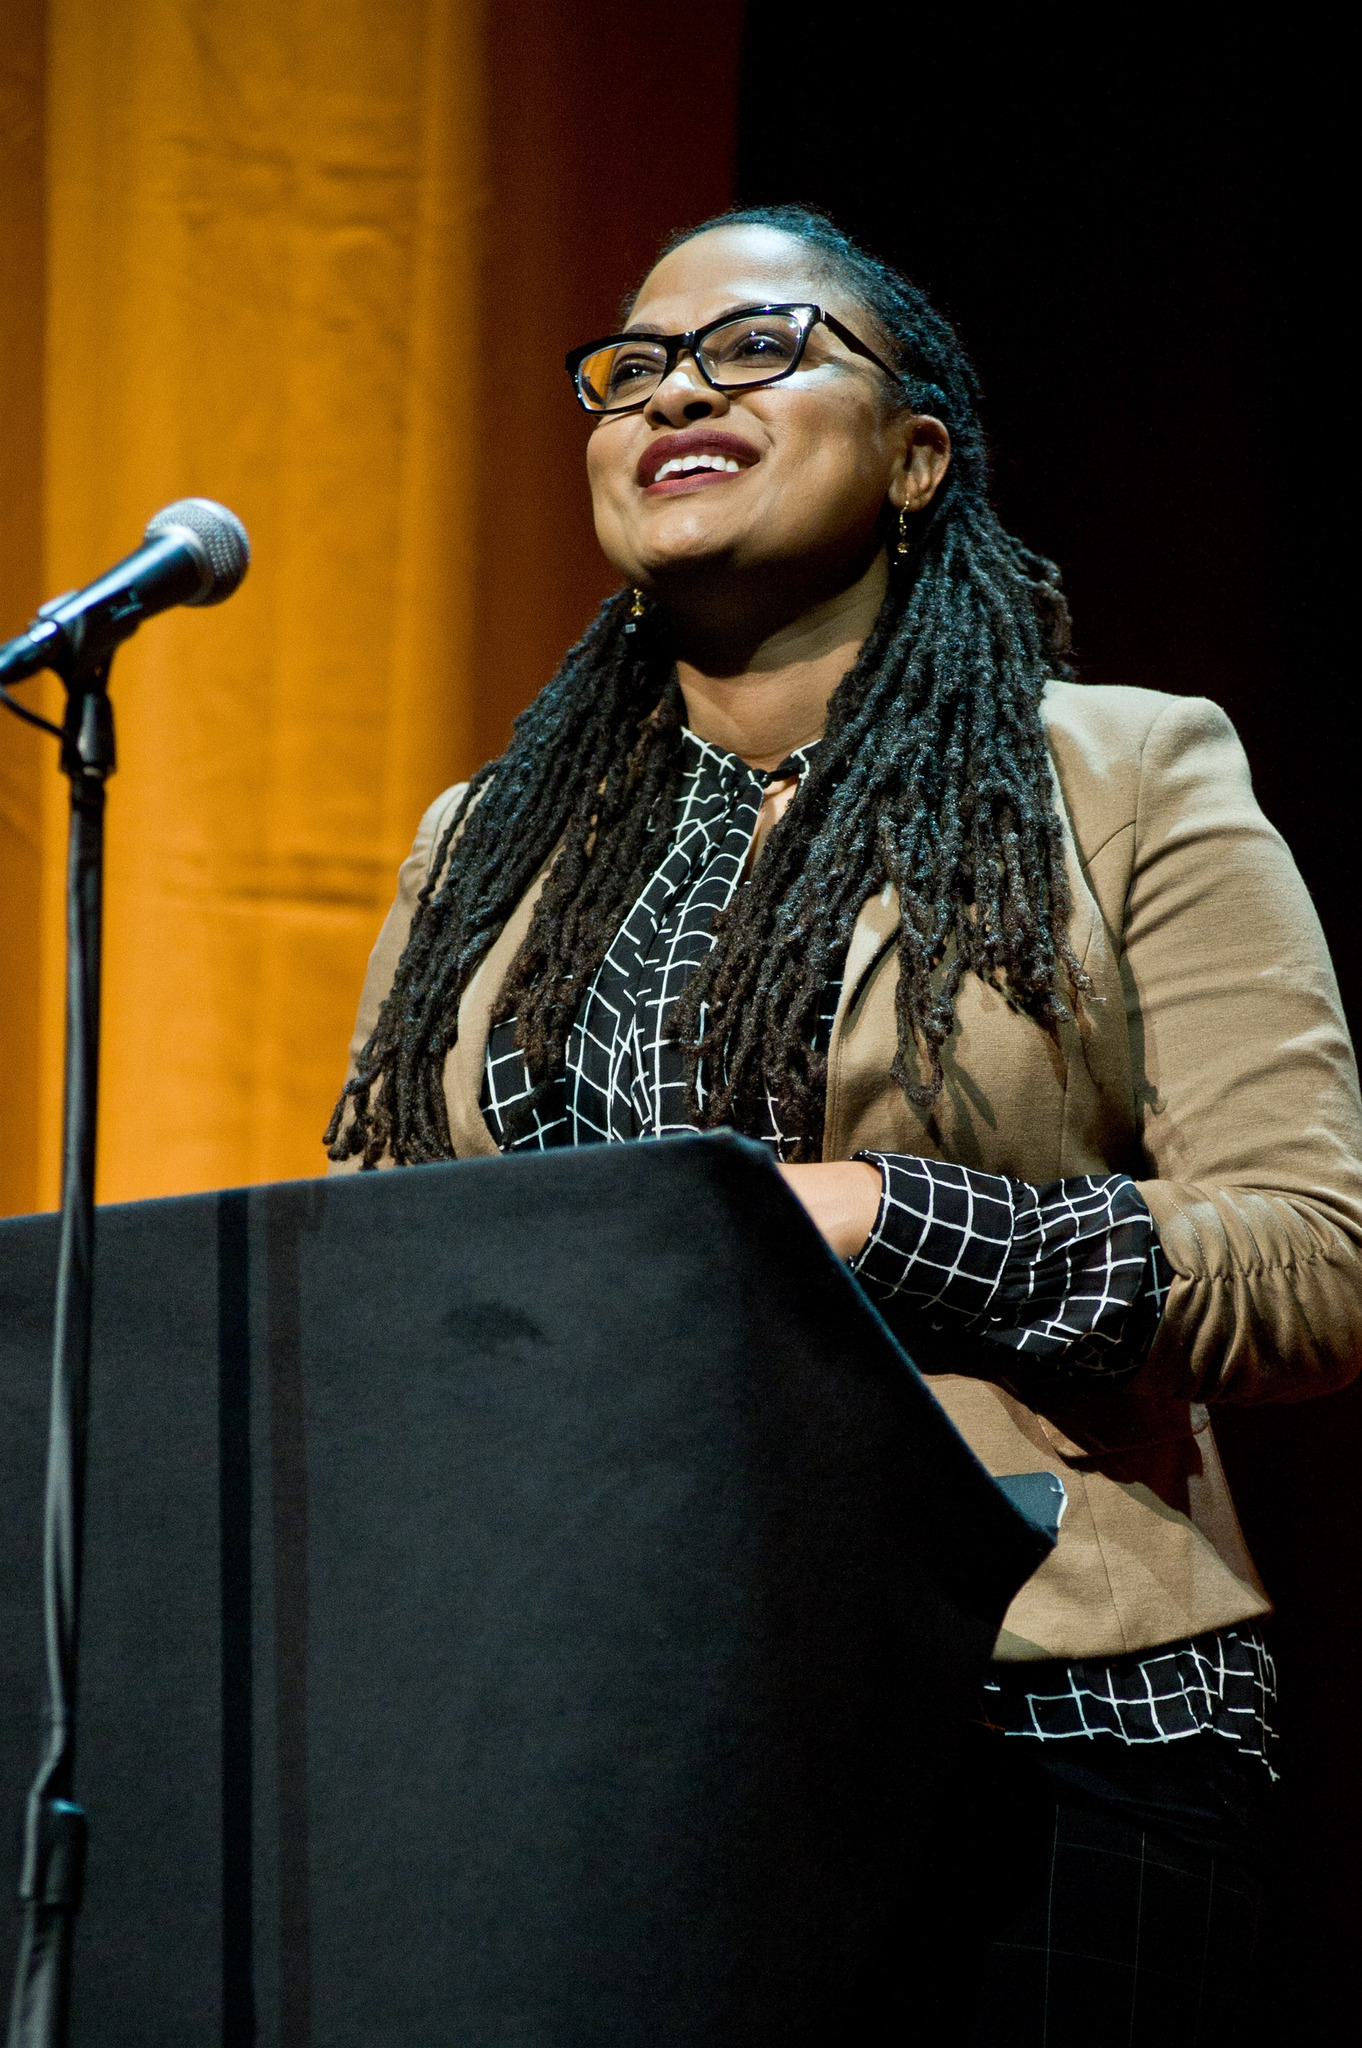 Director Ava DuVernay attends the Roger Ebert Memorial Tribute at Chicago Theatre on April 11, 2013 in Chicago, Illinois.